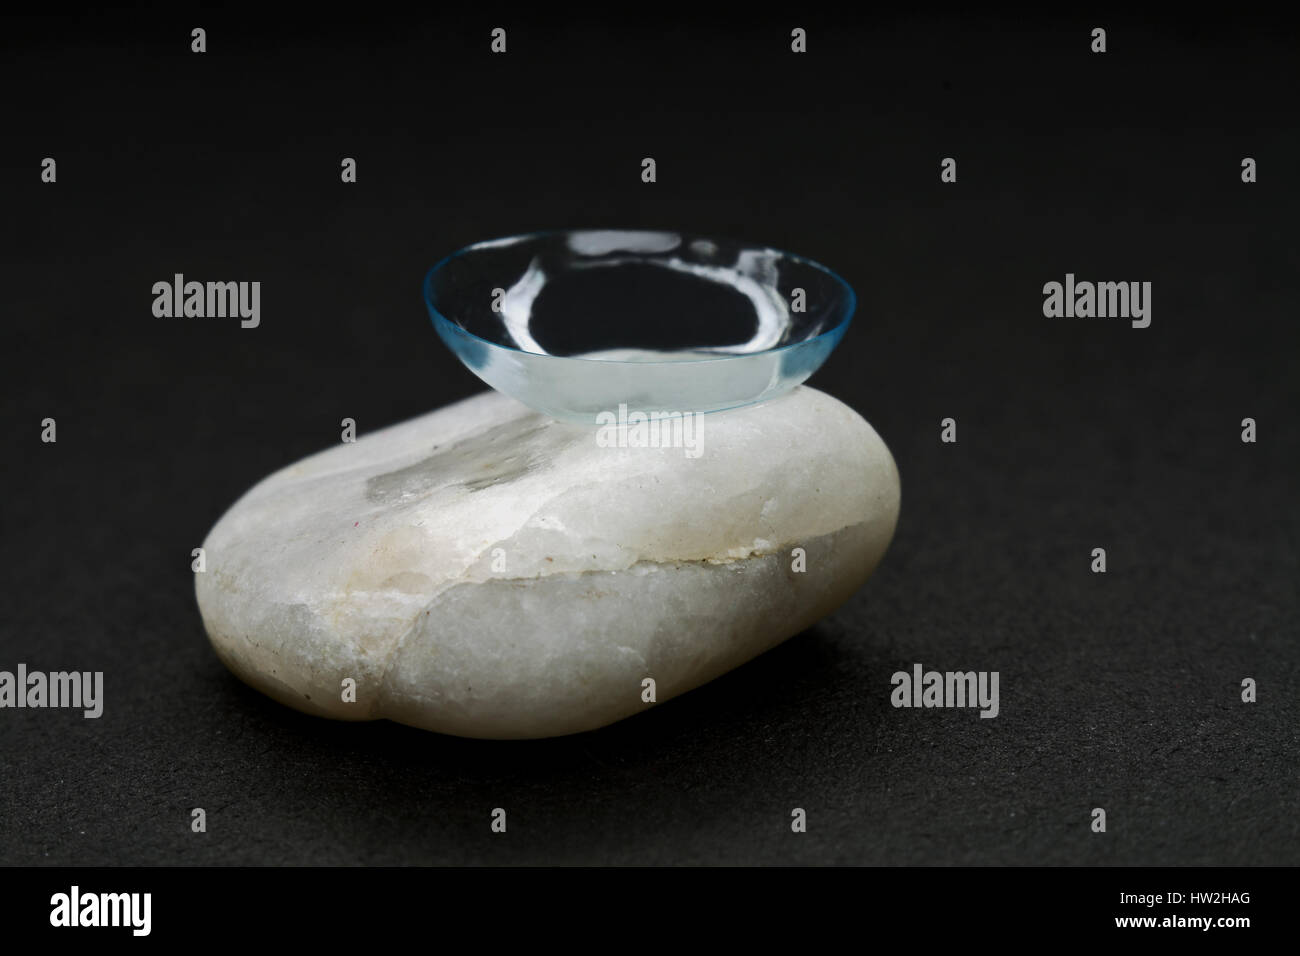 Contact lens on a piece of a granite-combination of fragility and hardness. Stock Photo